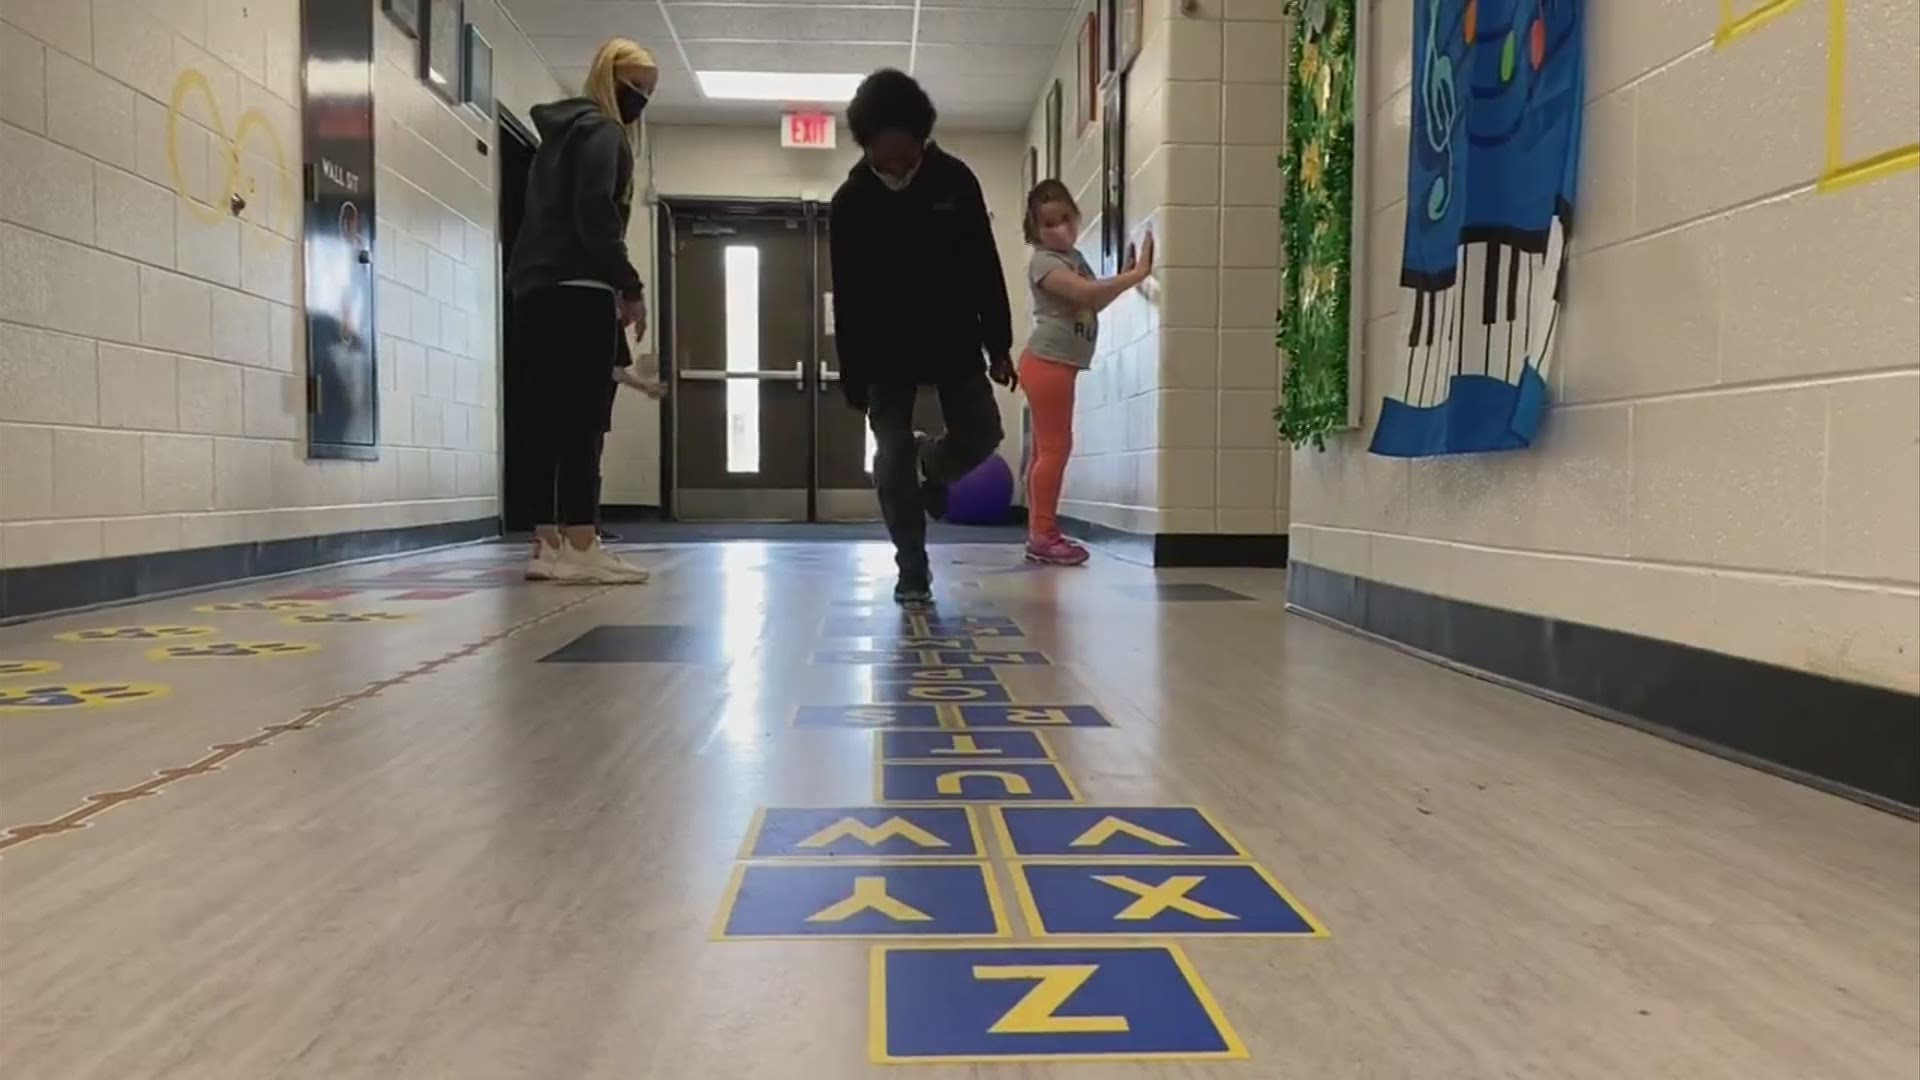 The sensory path helps students re-focus and re-energize at school.